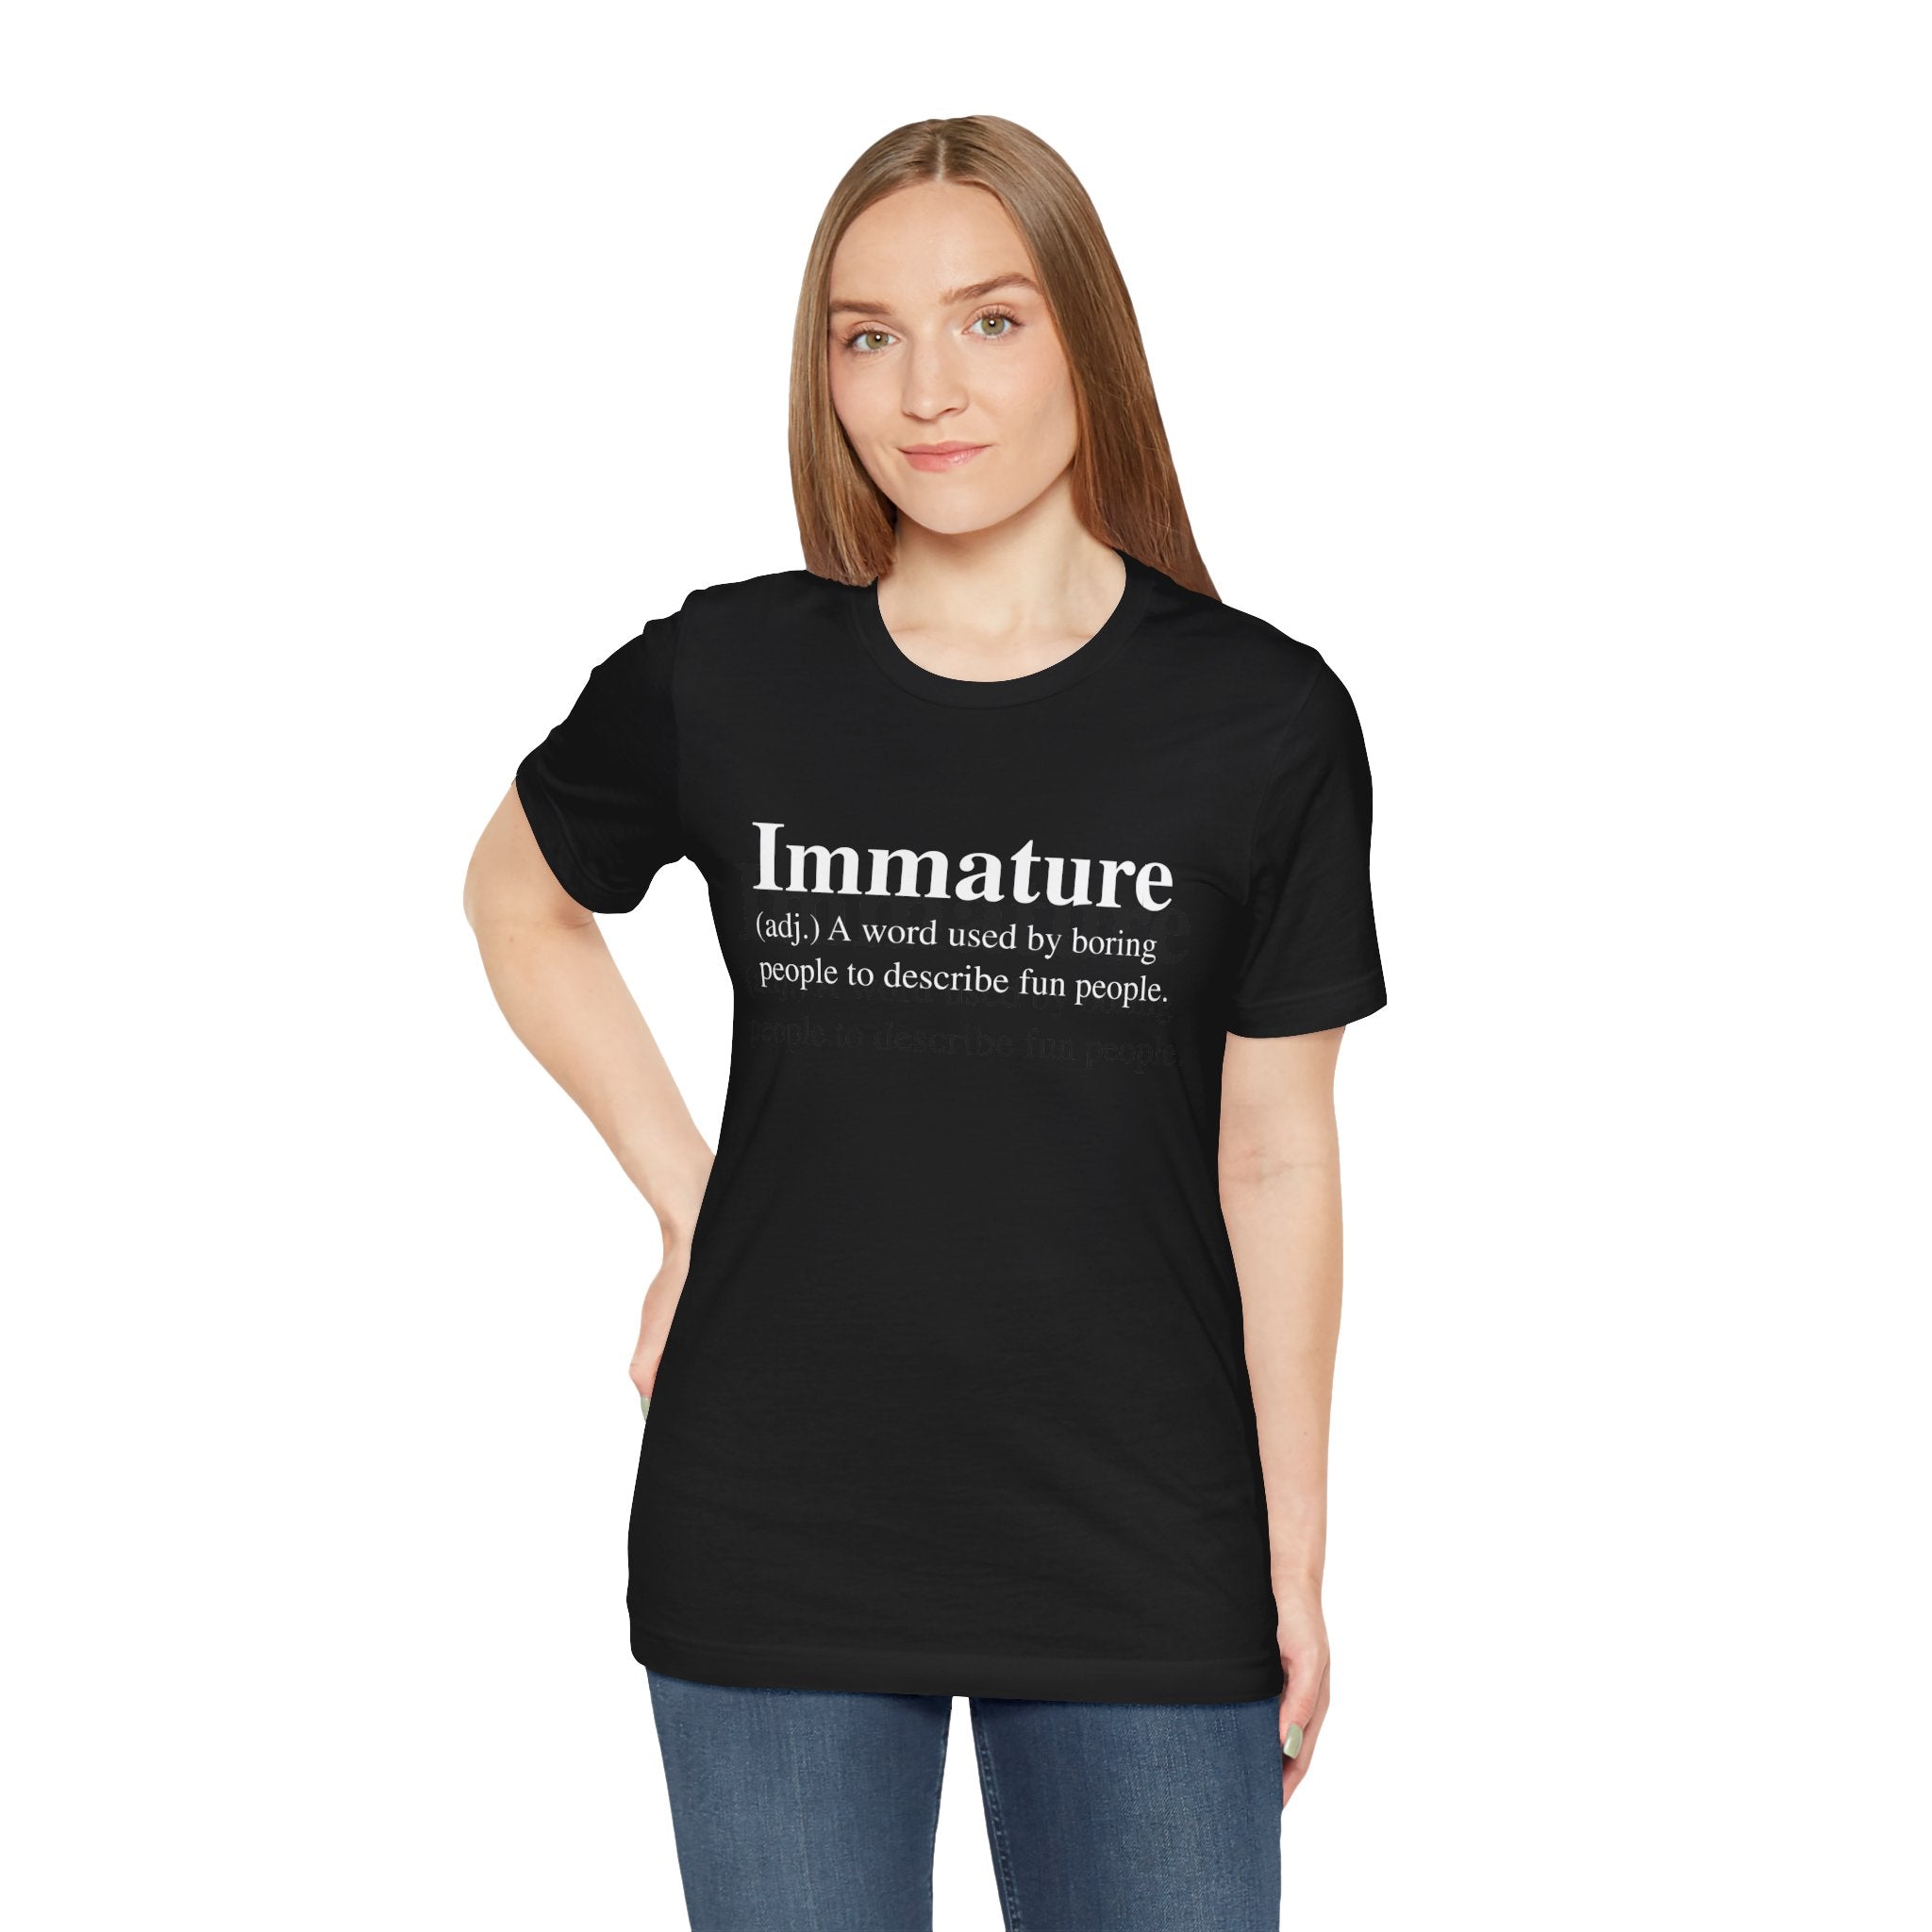 A young woman wearing an Immature T-Shirt with the word "immature" and a humorous definition printed in quality white text.